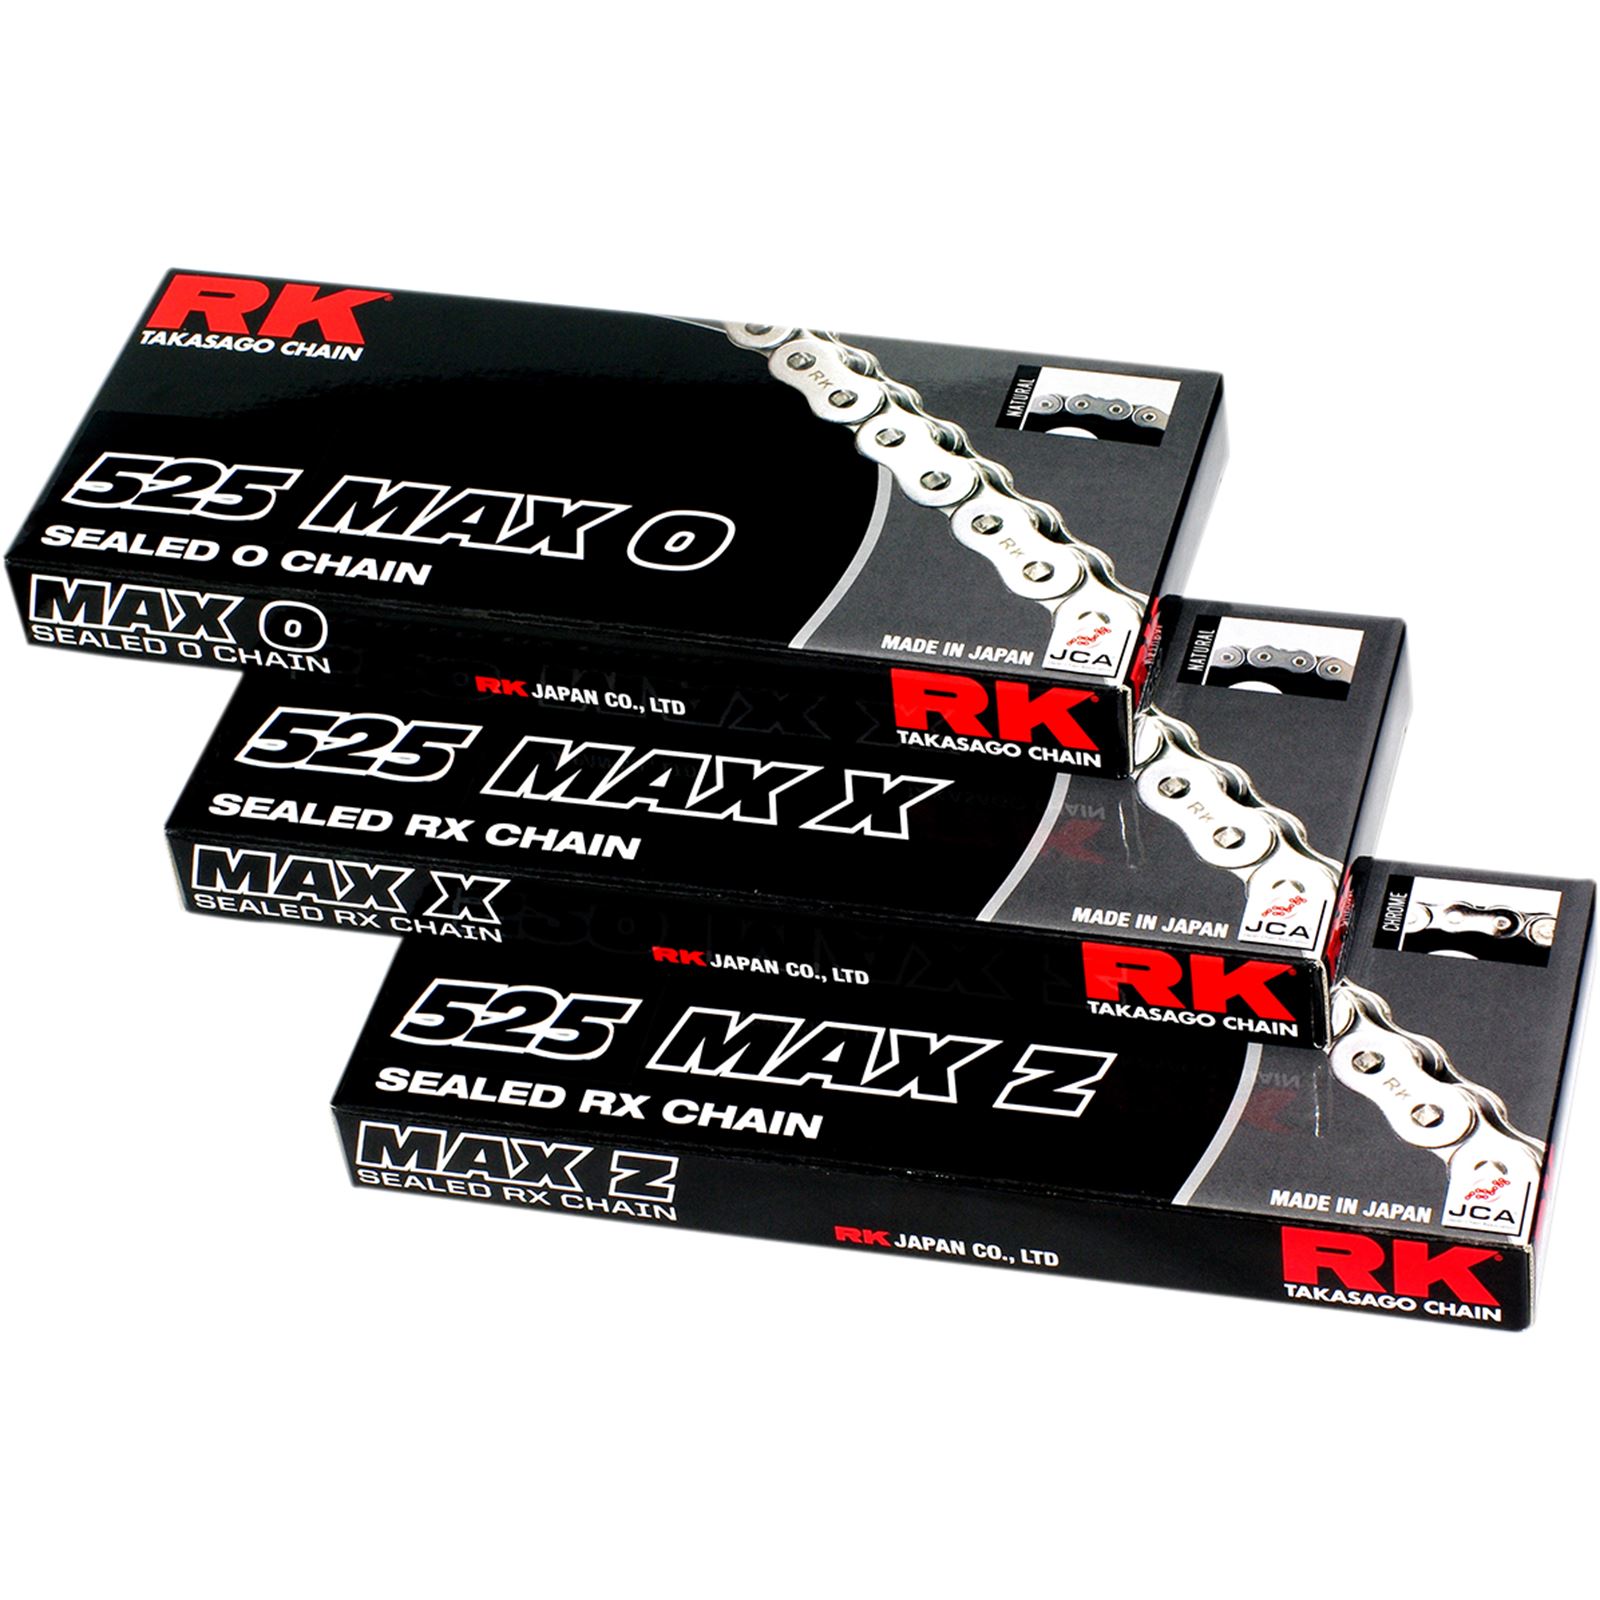 RK Excel 525 Max X - Chain - 150 Links